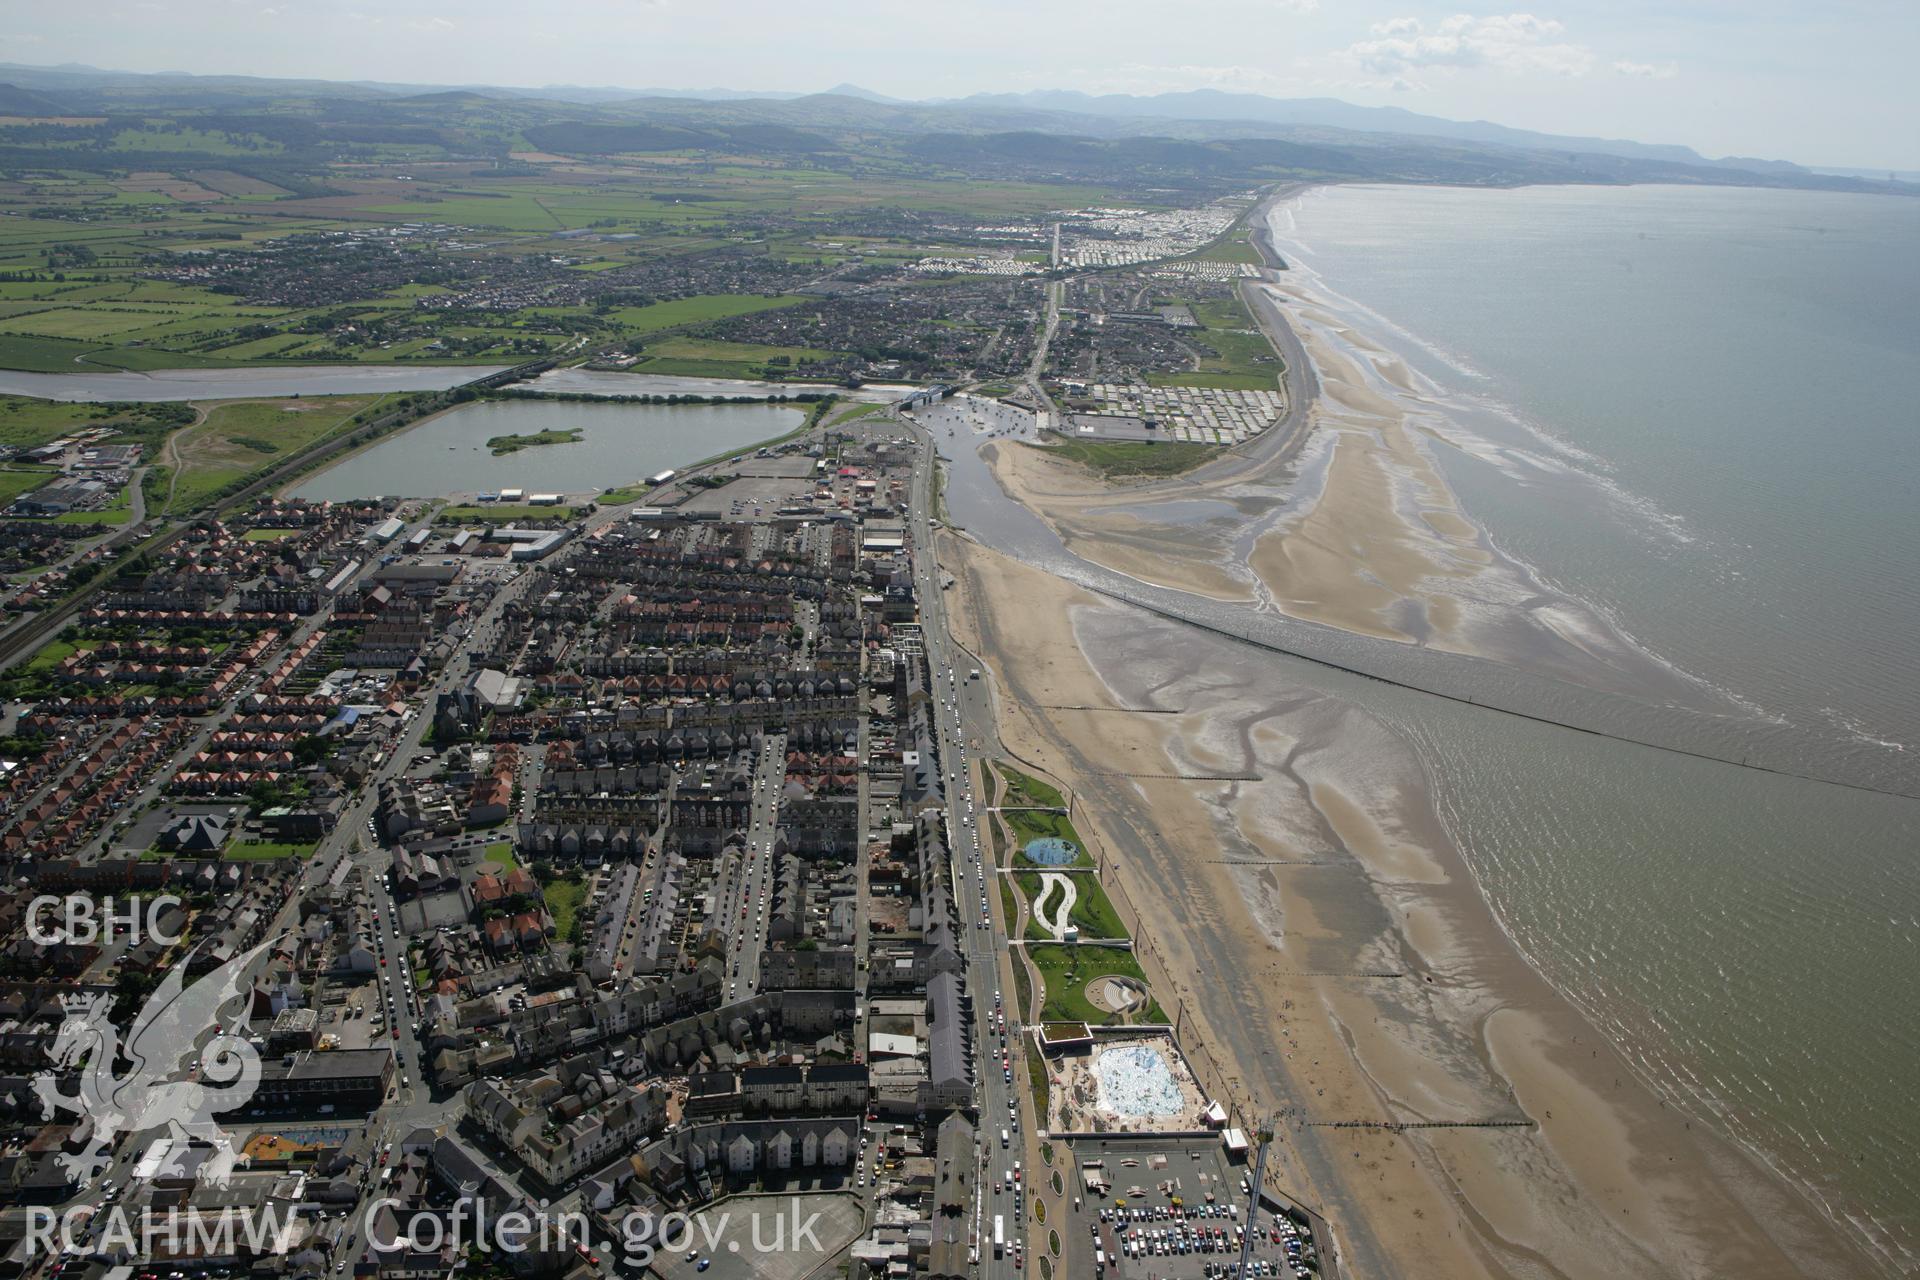 RCAHMW colour oblique aerial photograph of Rhyl looking west to Kinmel Bay. Taken on 31 July 2007 by Toby Driver